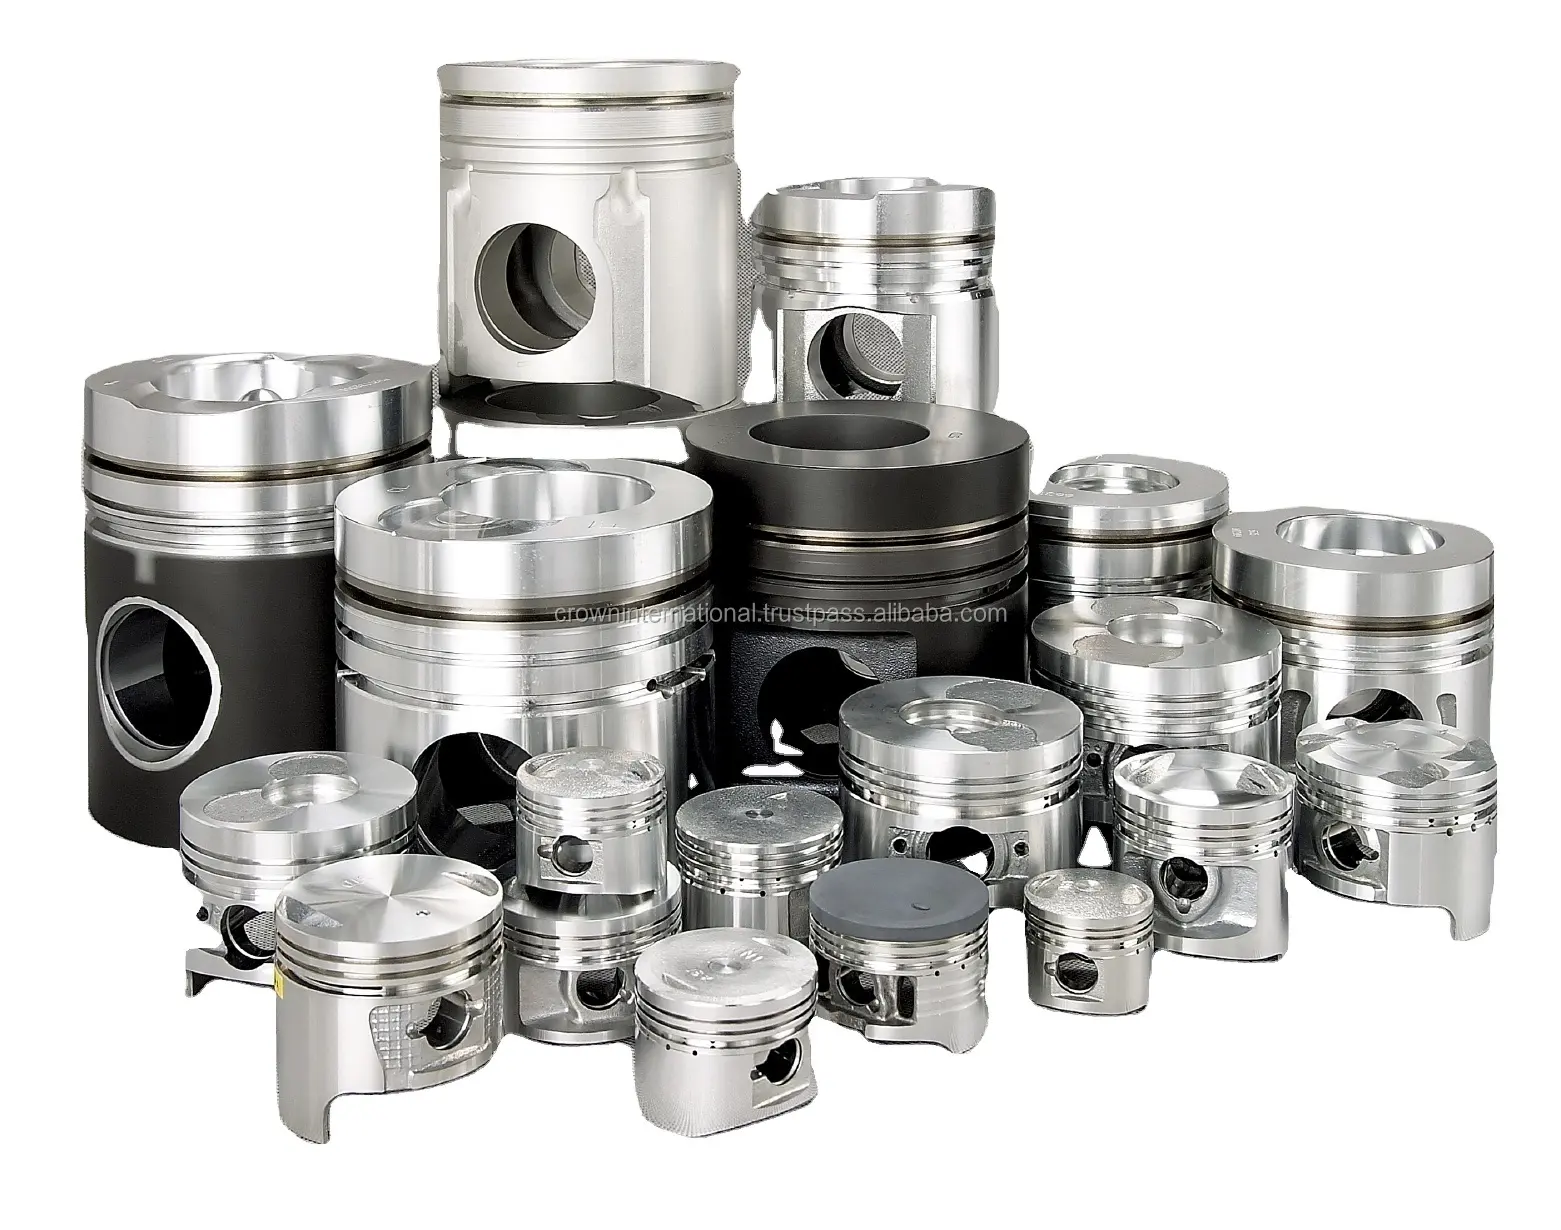 90mm Piston with Gudgeon Pin Kit Assembly fir for Hattz Engine Spare Parts in Factory Price